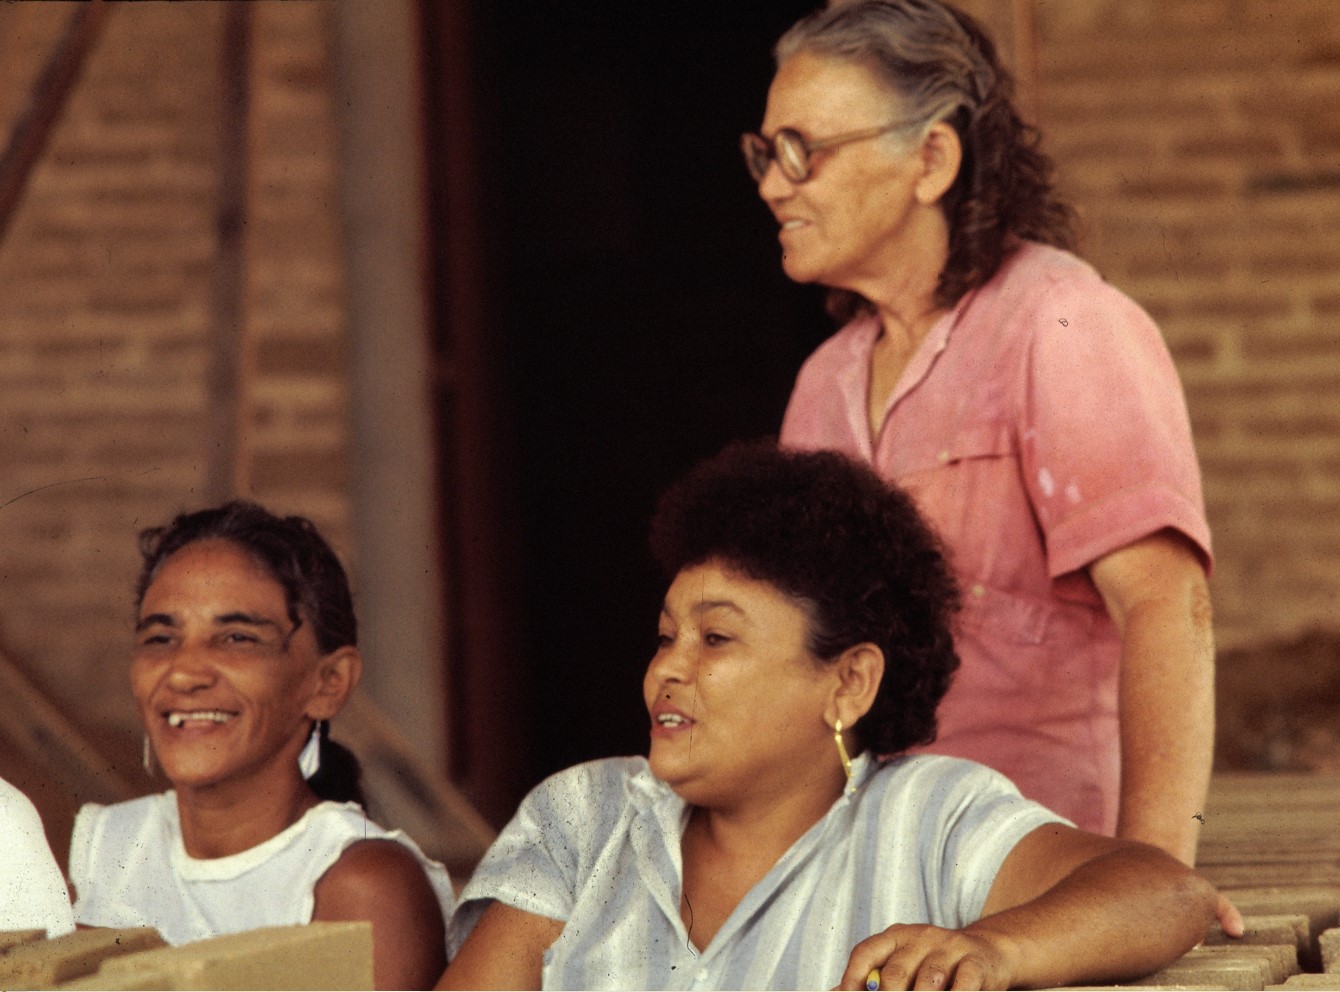 Photo 6: Mutirão 50 leaders. In front, Dona Margarida, future President of CONPOR, and Dona Lúcia. Joy and laughter were integral parts of the Mutirão 50 process. Photo: Yves Cabannes